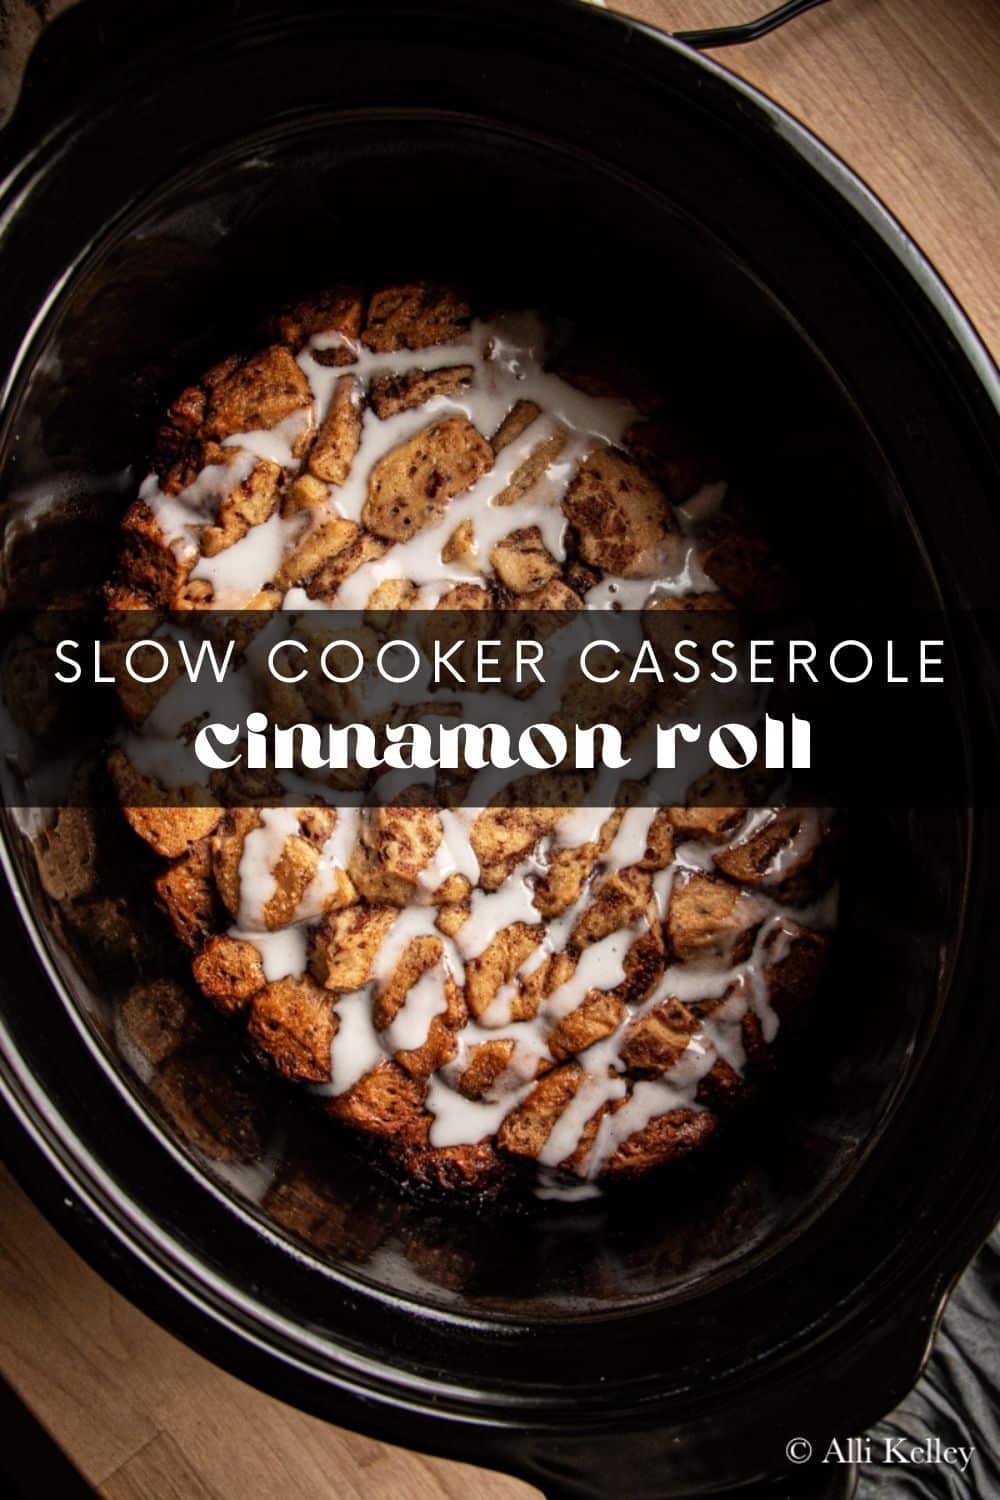 Crock pot cinnamon roll casserole is the ultimate breakfast treat! It’s so easy to make – all you need is a few key ingredients, and the slow cooker does the rest.